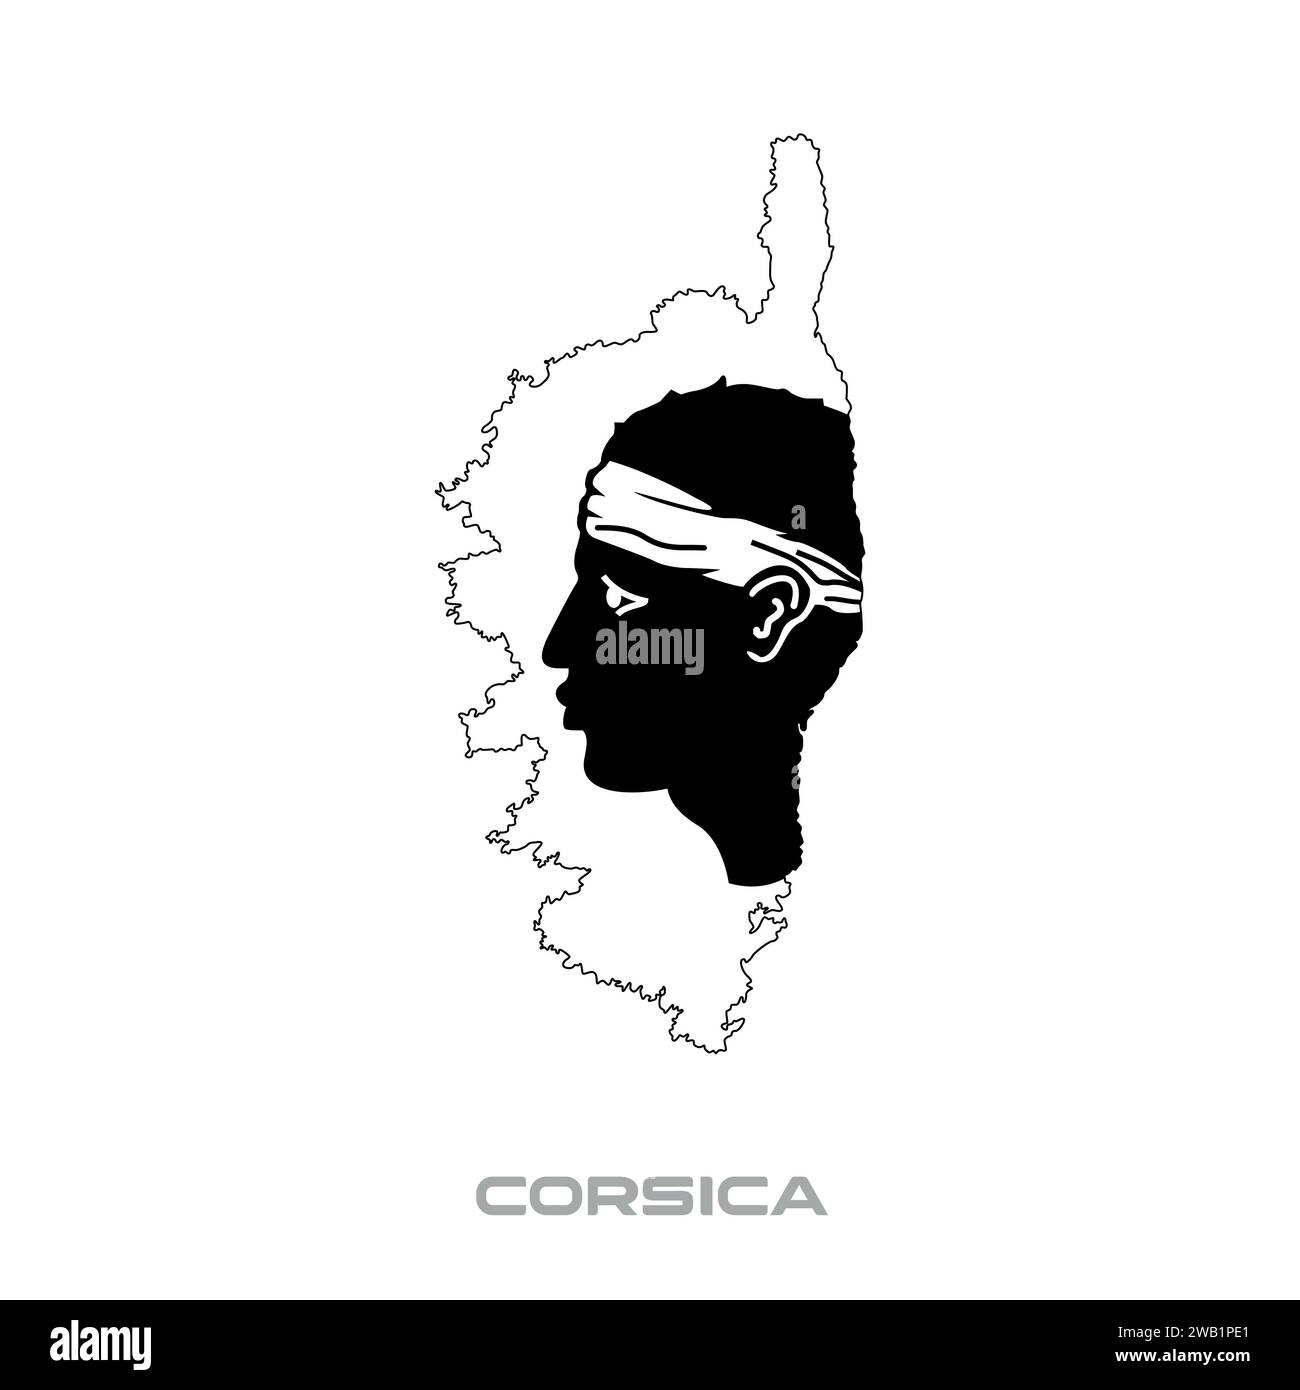 Vector illustration of the flag of Corsica with black contours on a white background Stock Vector